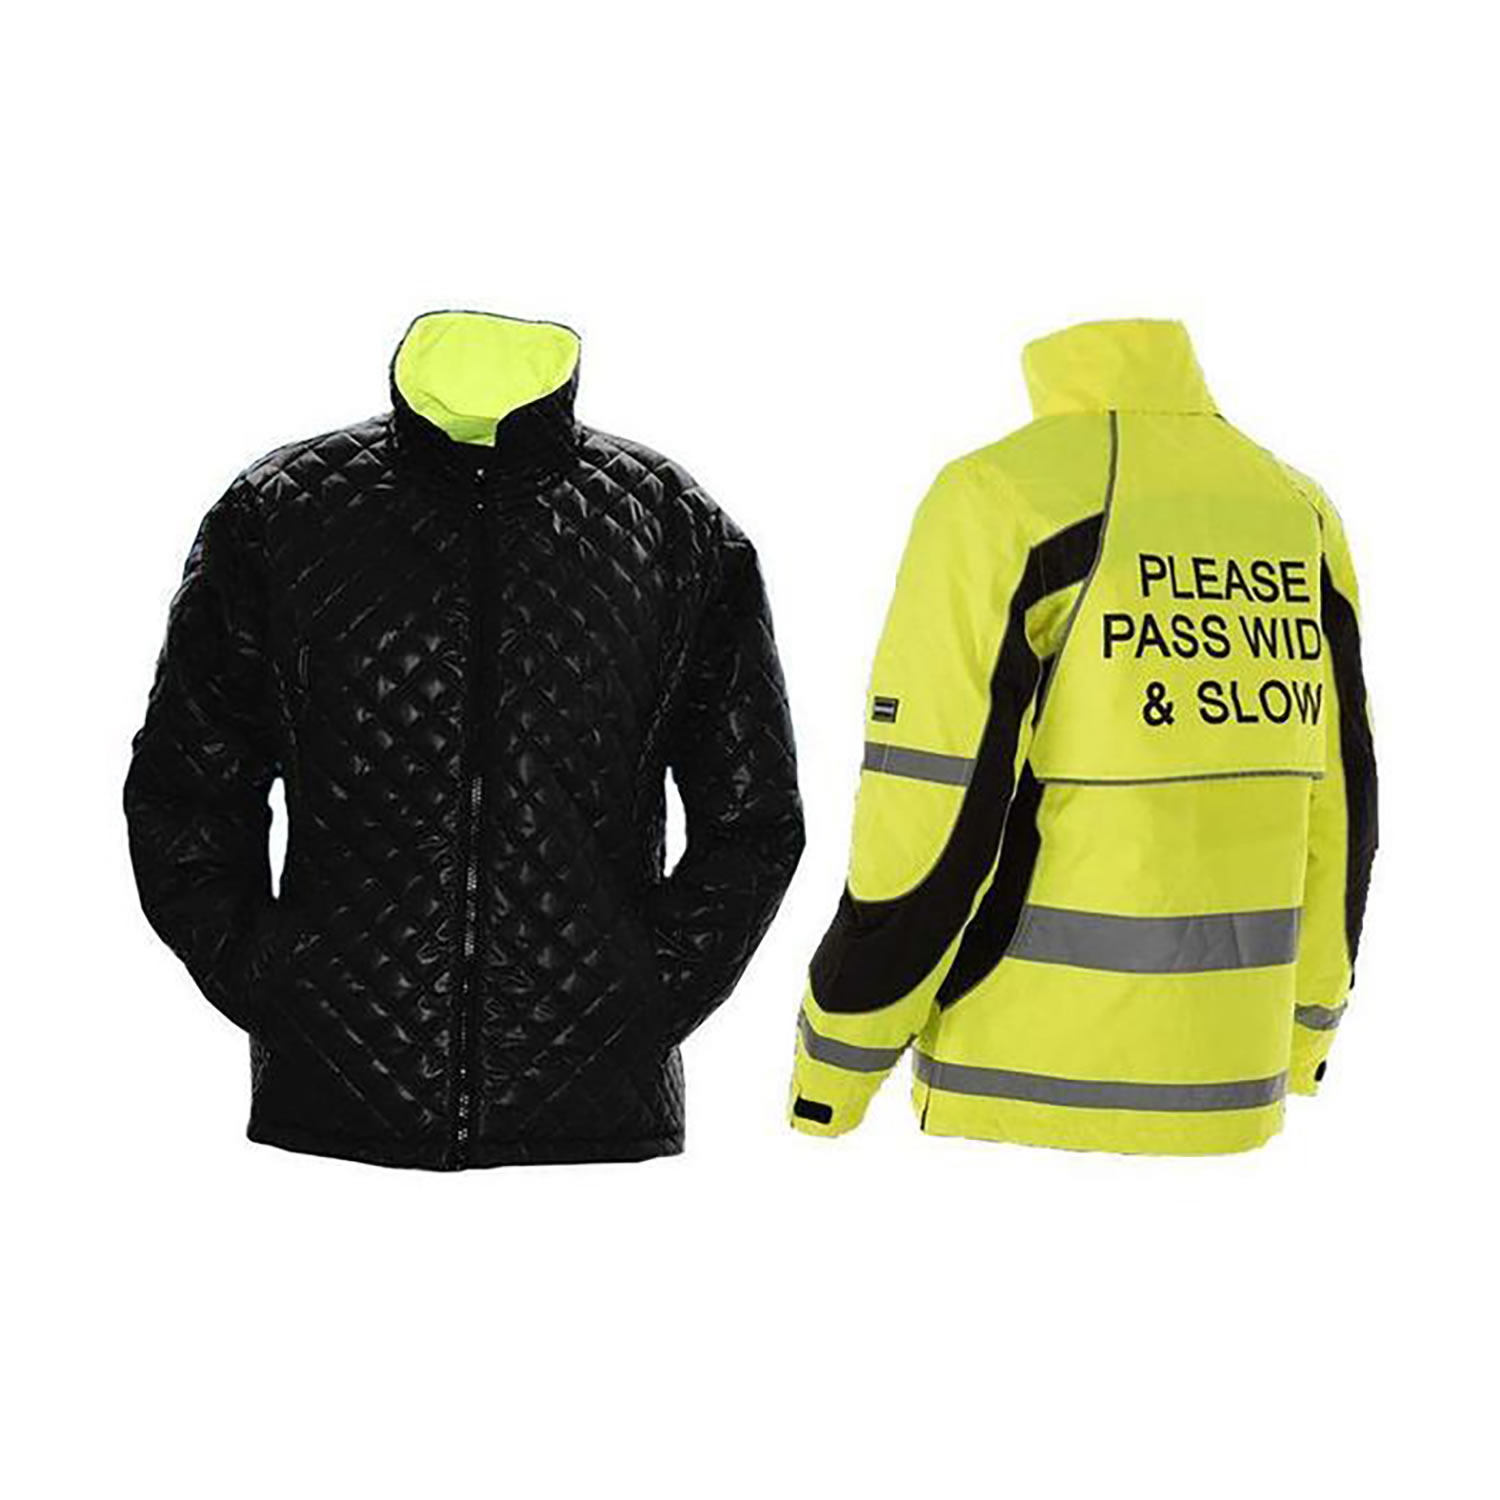 EQUISAFETY WINTER INVERNO RIDING JACKET YELLOW